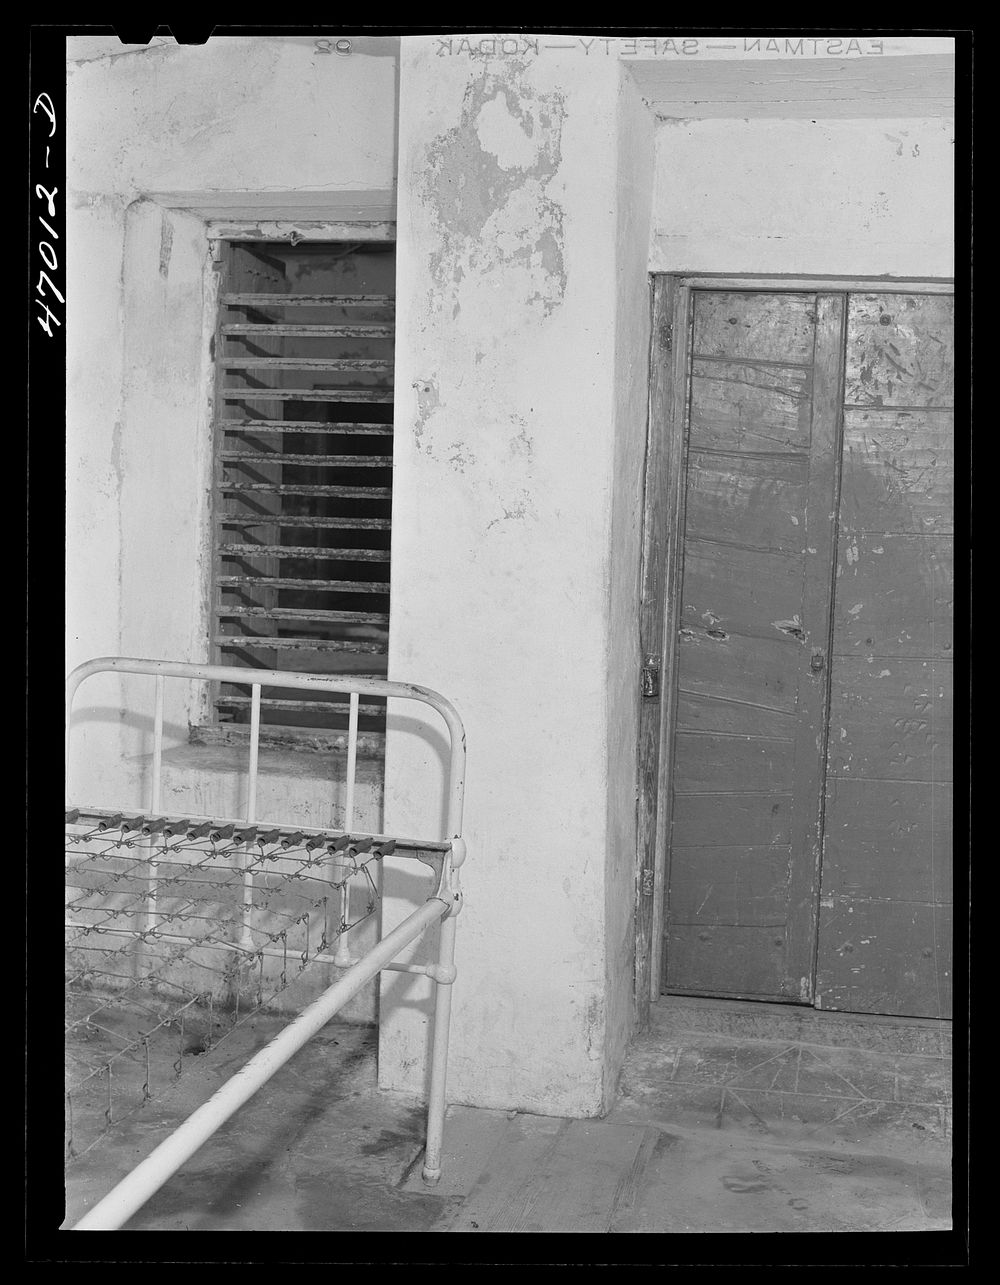 Frederiksted, Saint Croix Island, Virgin Islands. One of the cells for the insane at the Frederiksted hospital. Sourced from…